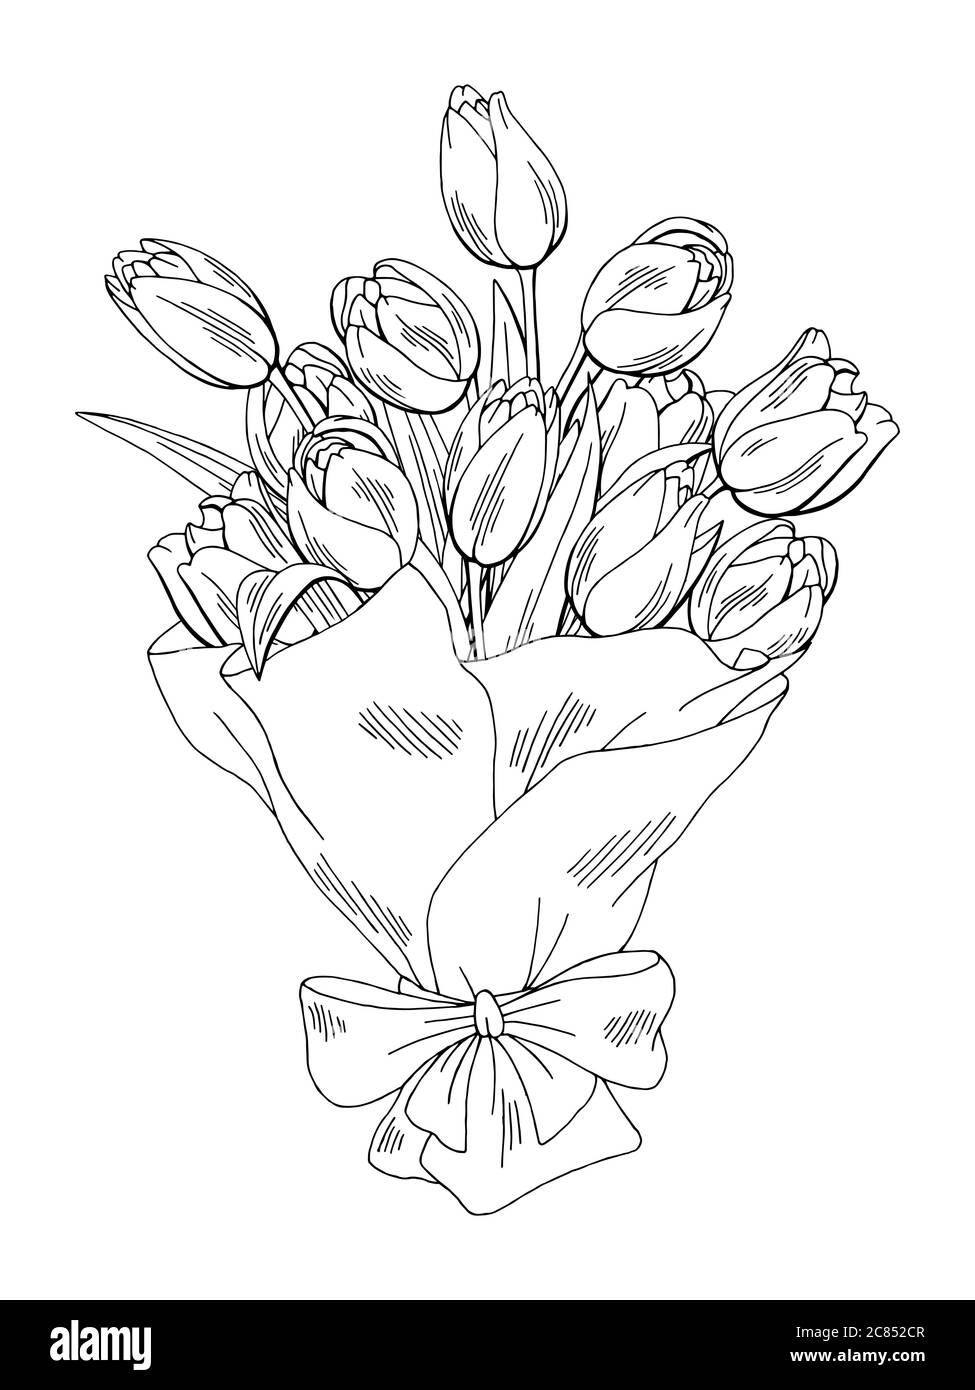 Flower Bouquet Drawing  How To Draw A Flower Bouquet Step By Step